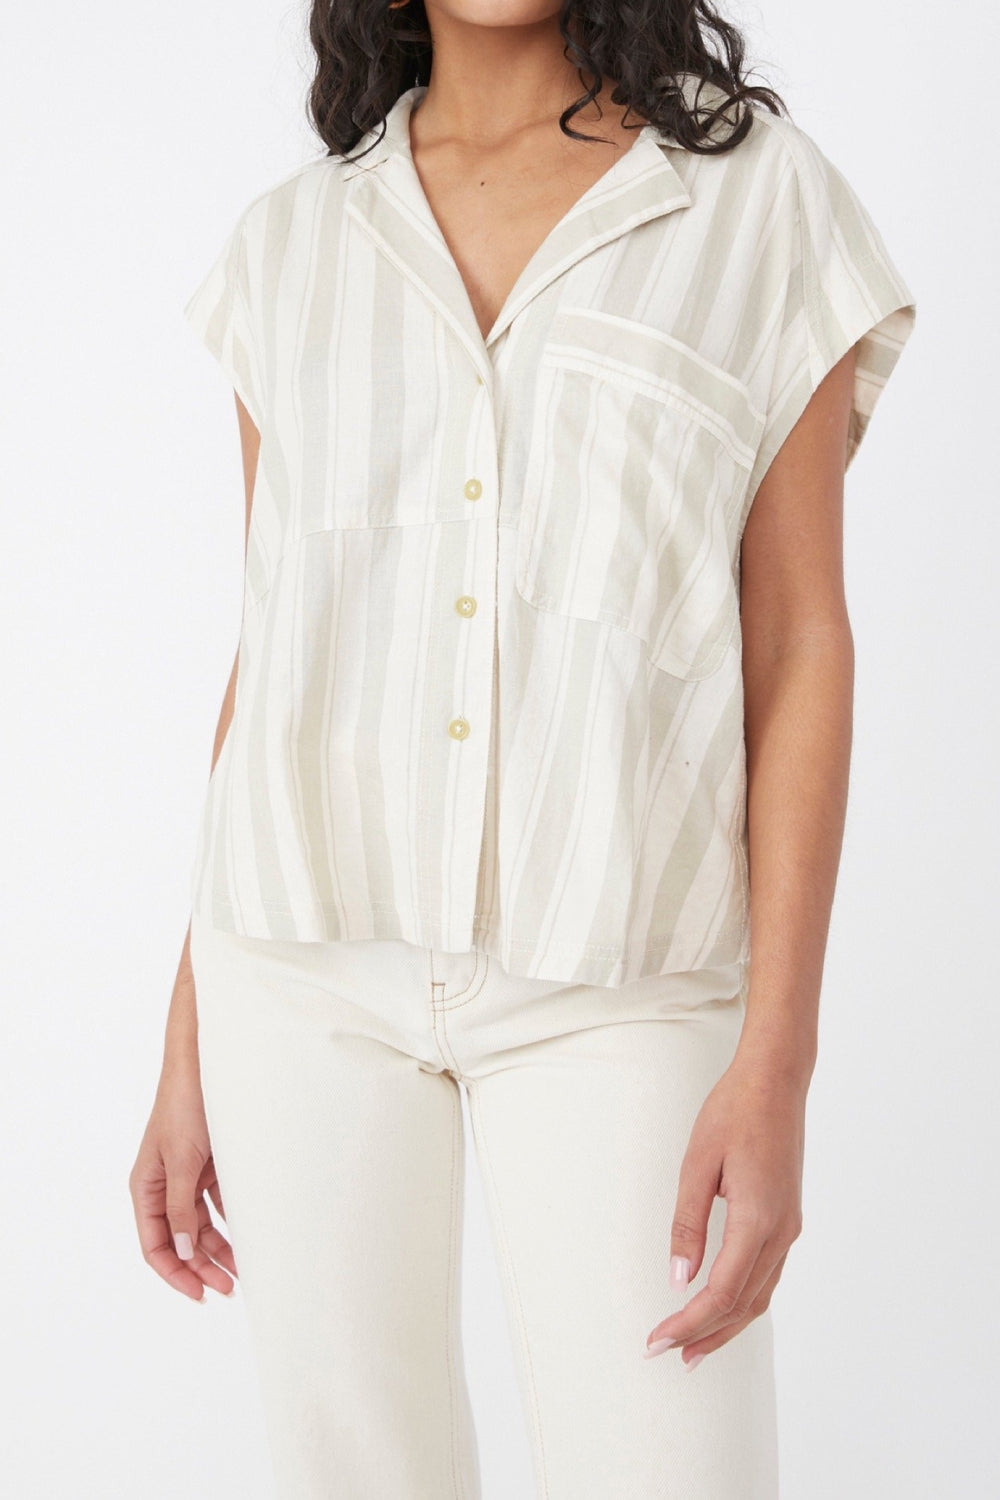 Ivory Play It Cool Top